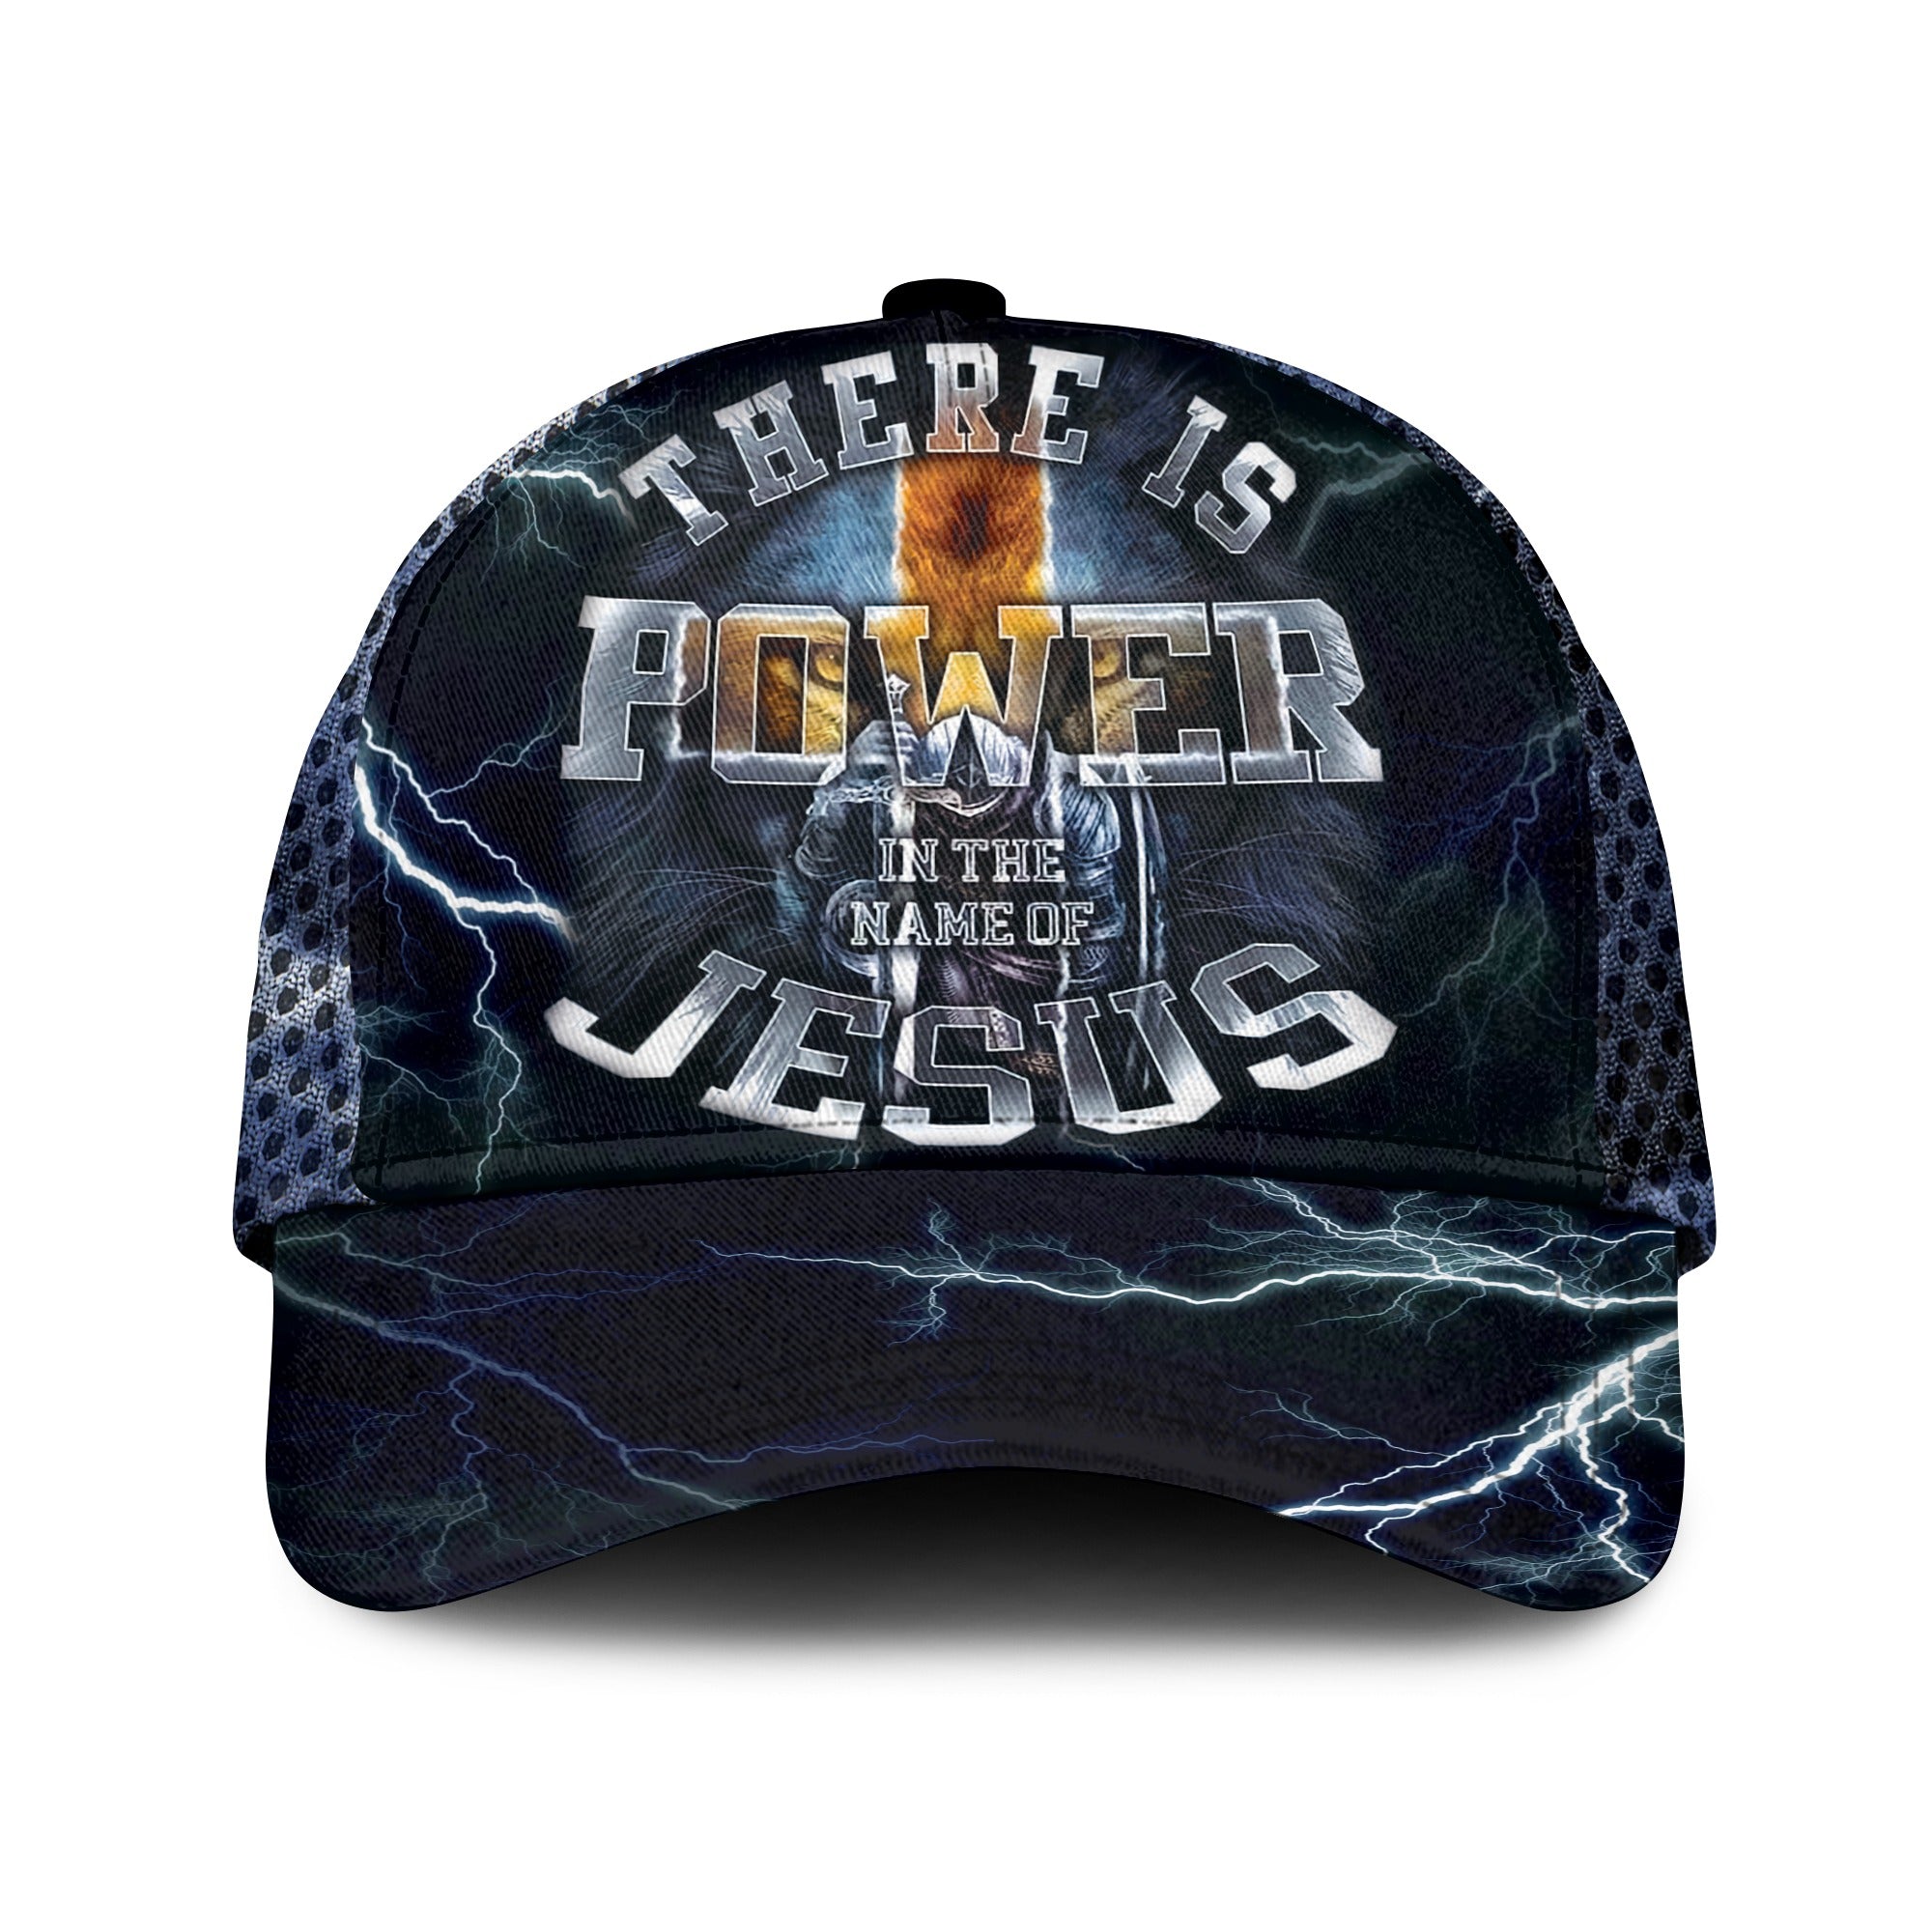 Warrior Man There's Power In The Name Of Jesus Over Print Cap